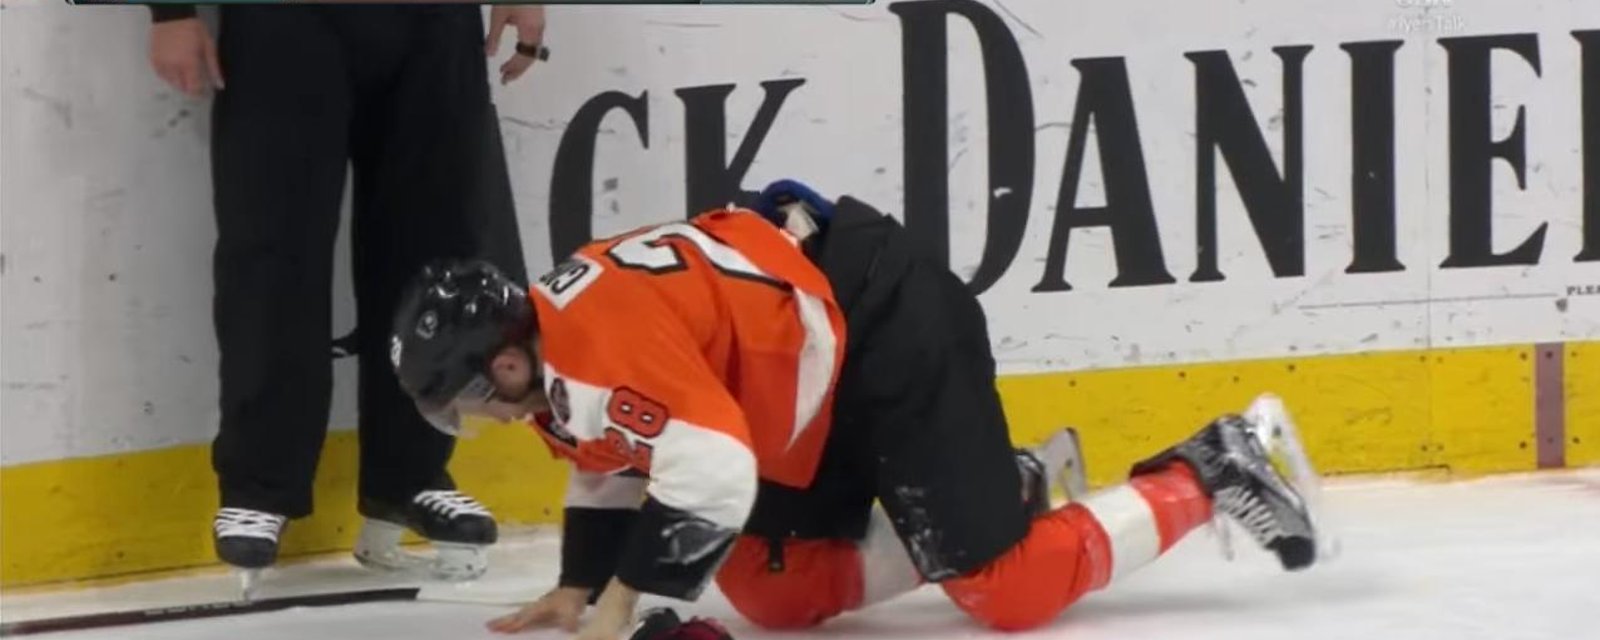 Ho-Sang nearly blinded Claude Giroux! 